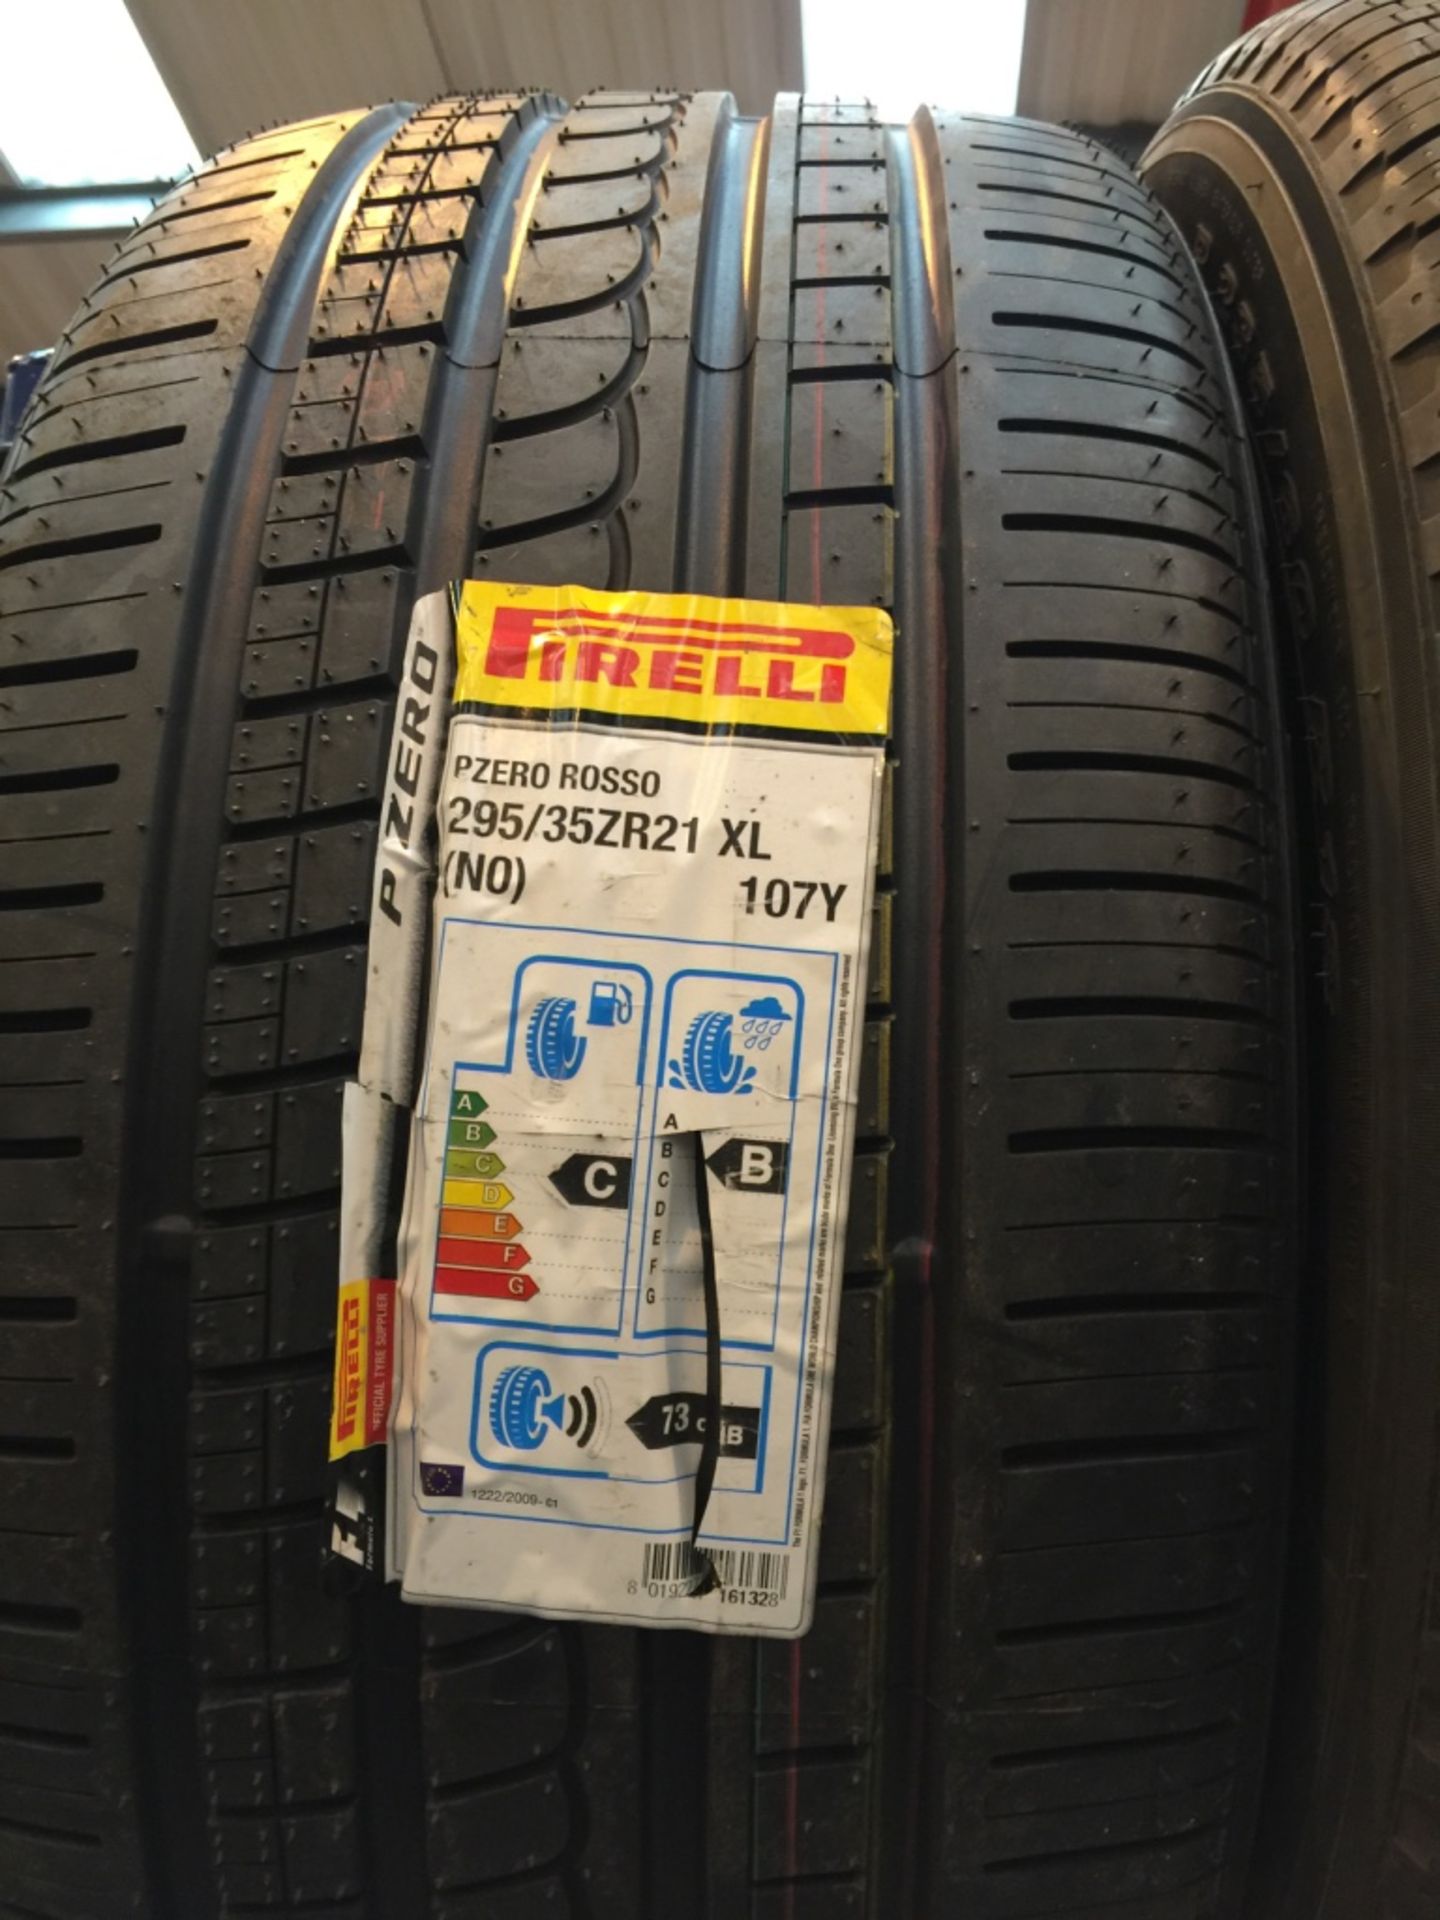 54: Pirelli Tyres Car & 4X4 - Many Large Sizes to include 18,19,21" Please see further Pictures ( - Image 20 of 55